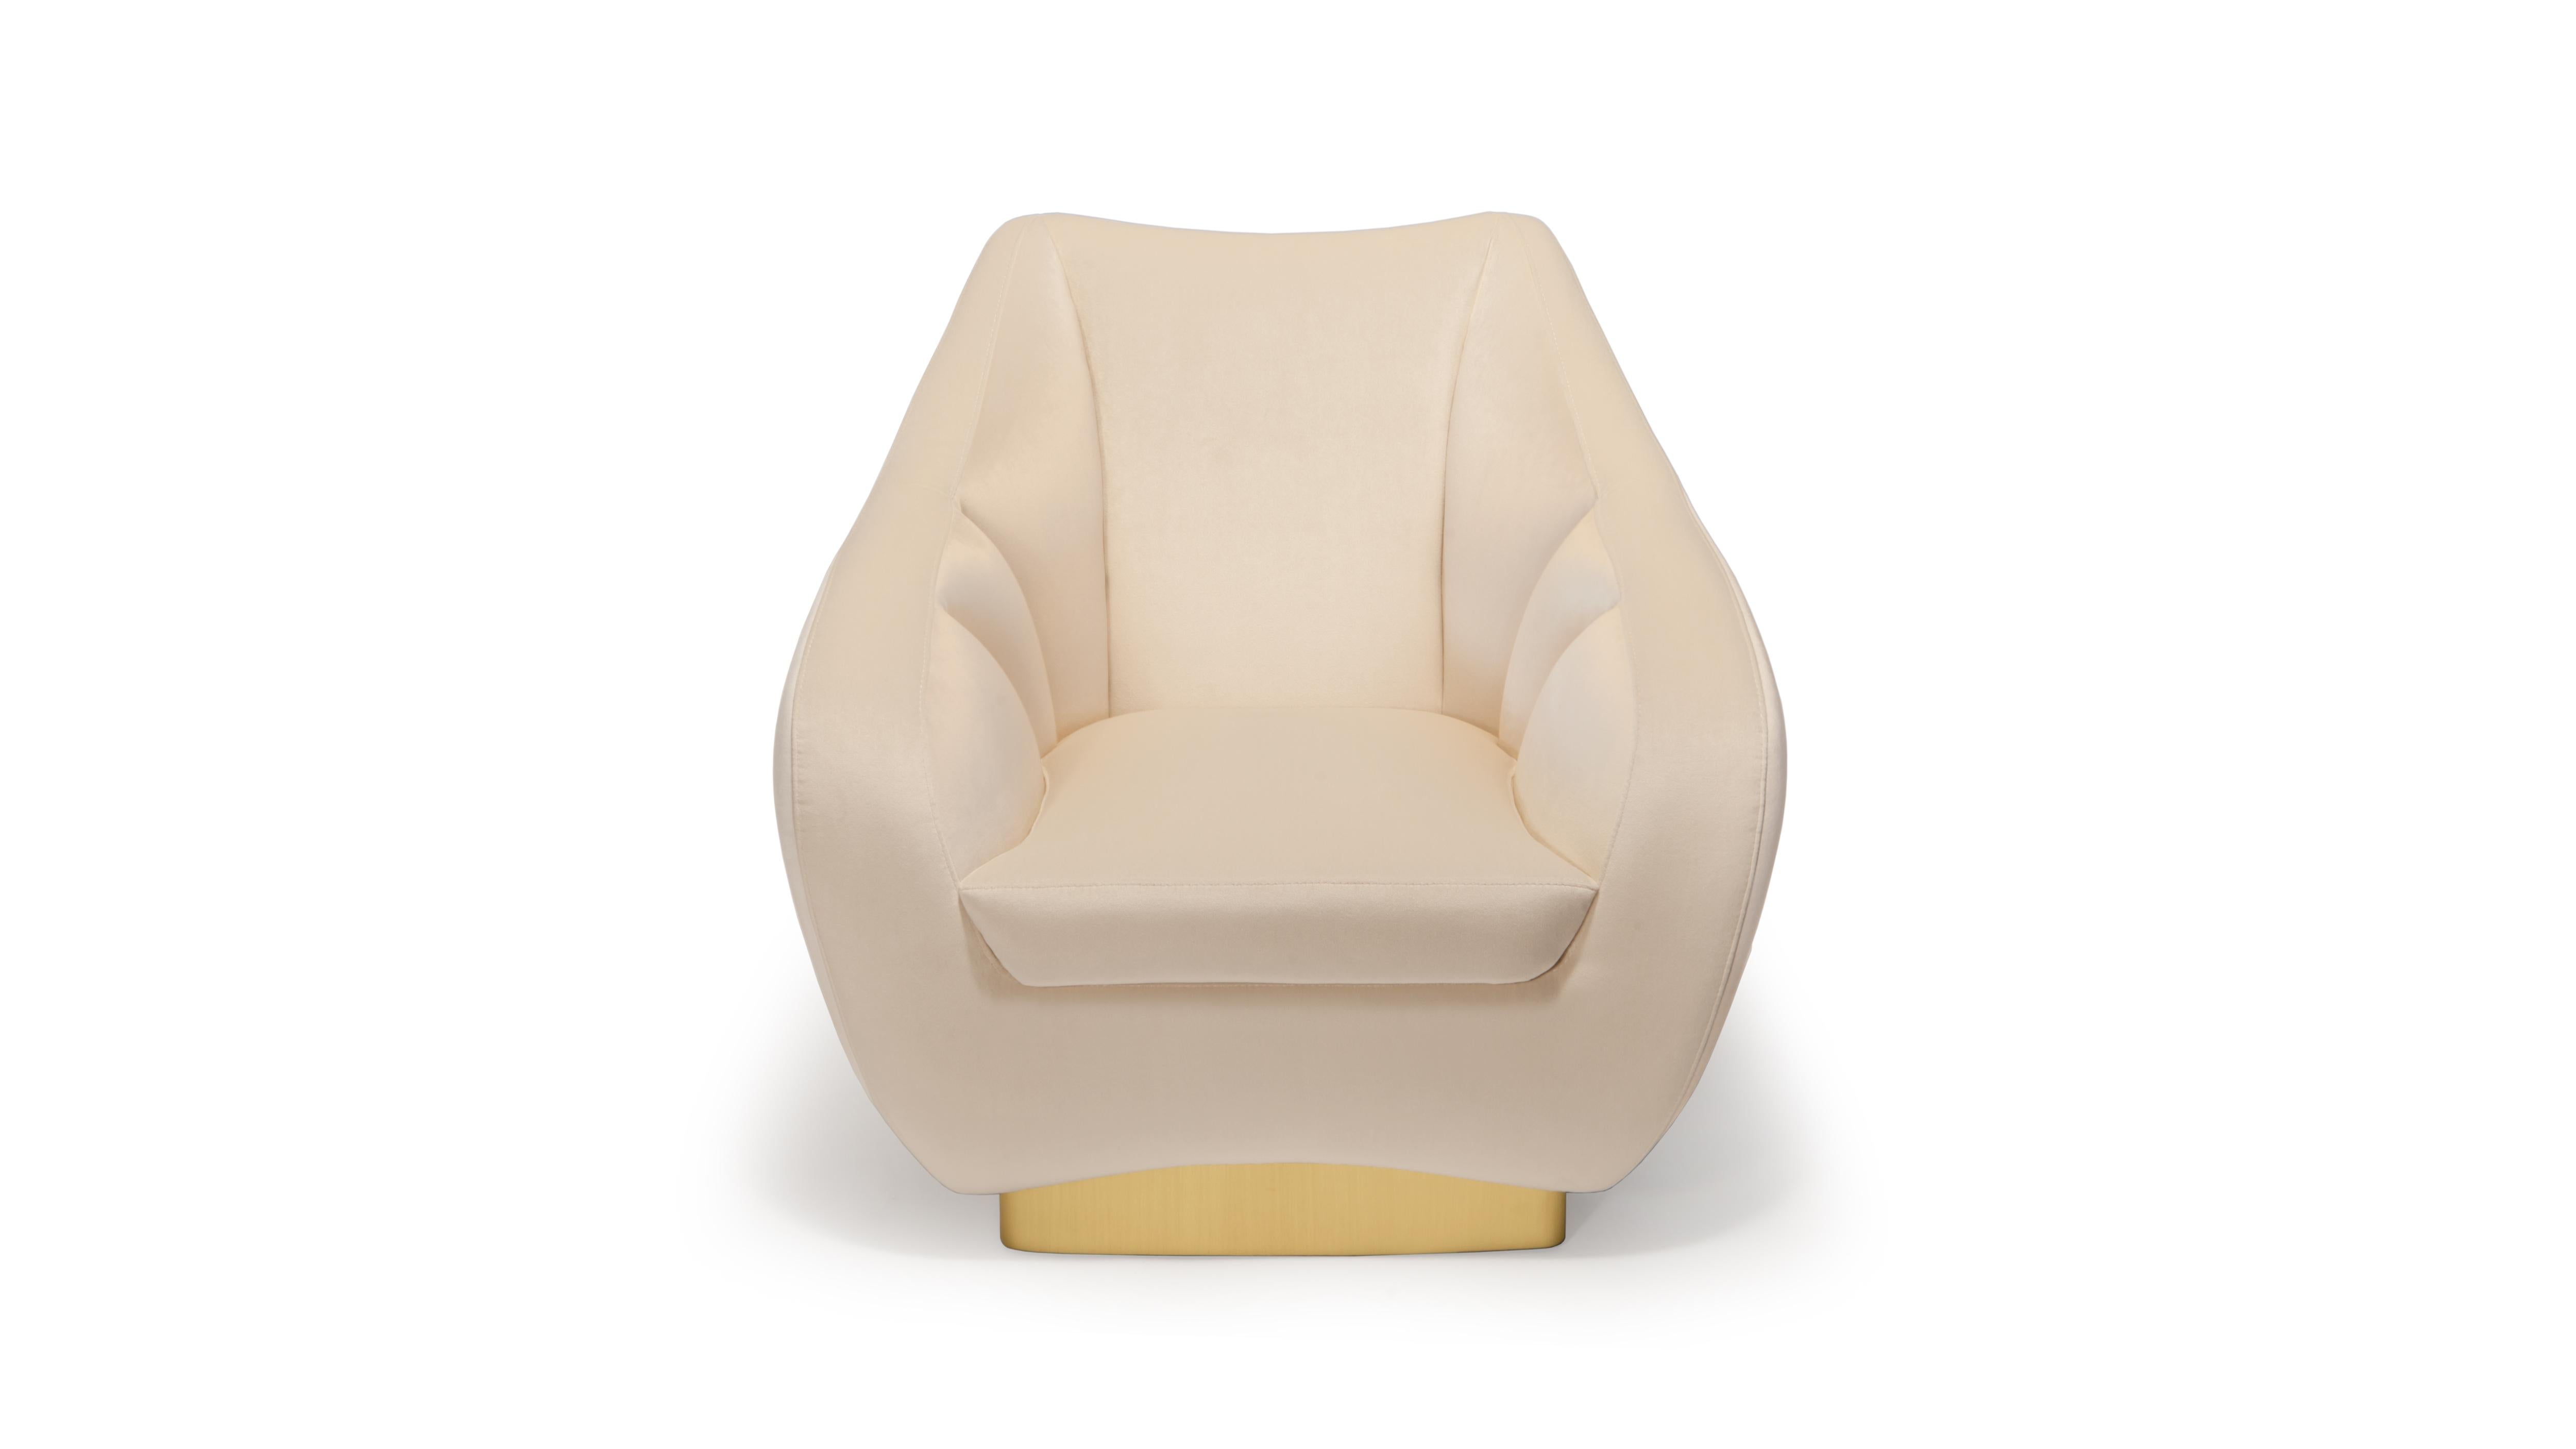 Figueroa Armchair by InsidherLand
Dimensions: D 90 x W 90 x H 90 cm.
Materials: Brushed brass, InsidherLand Bright Velvet Ref. Ivory fabric.
30 kg.
Available in different fabrics.

Located in the sunny California on the south-west of the United